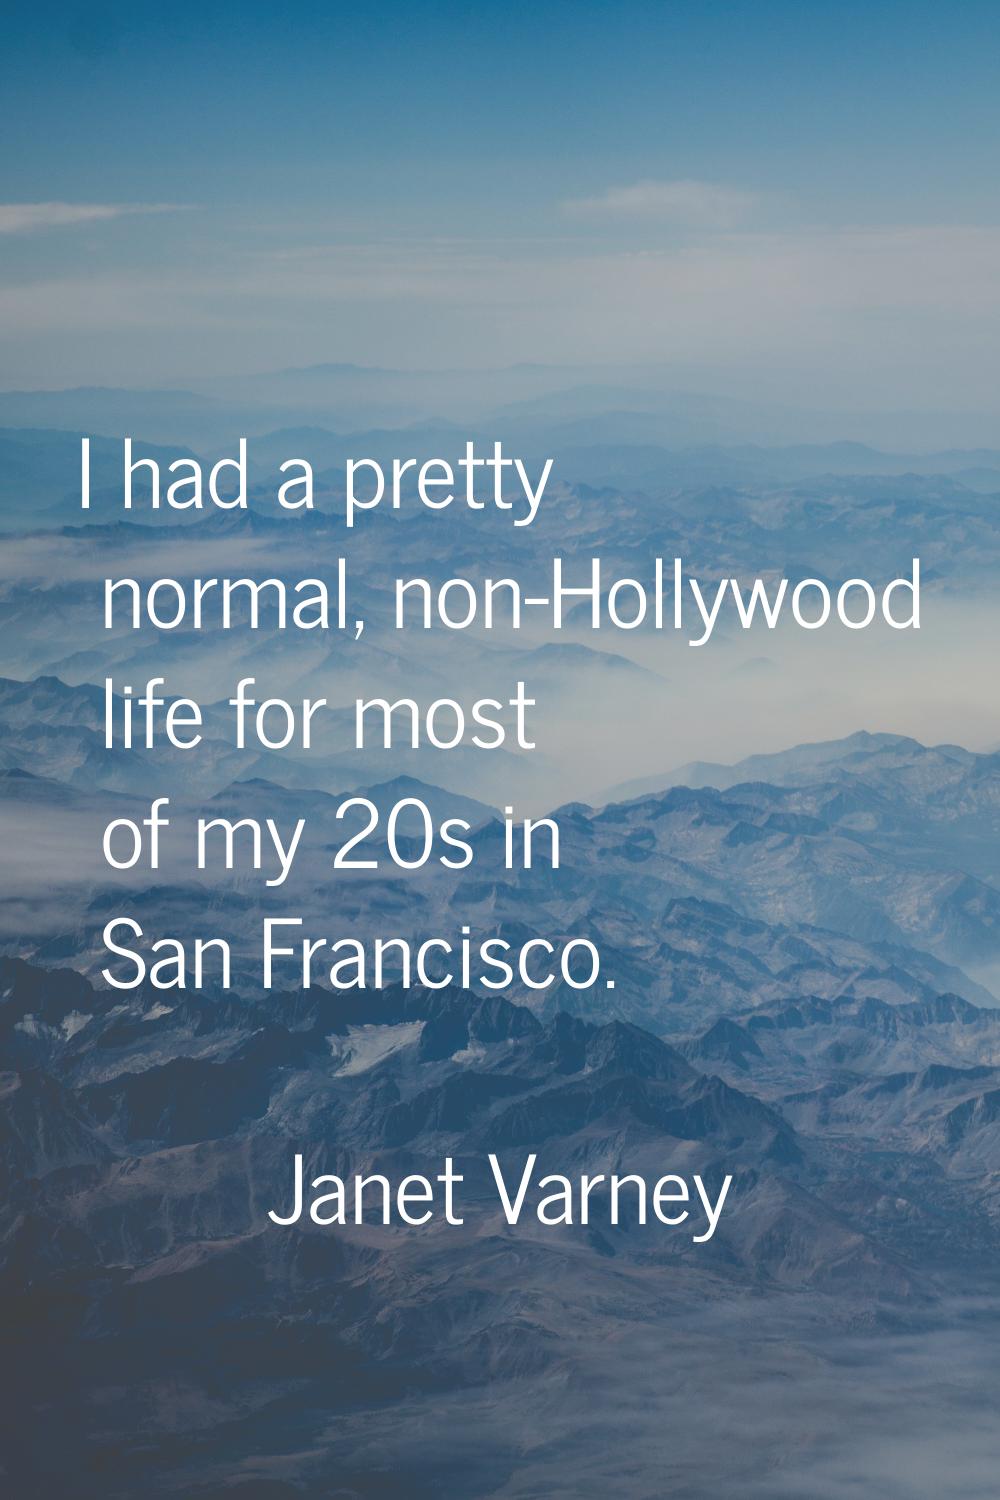 I had a pretty normal, non-Hollywood life for most of my 20s in San Francisco.